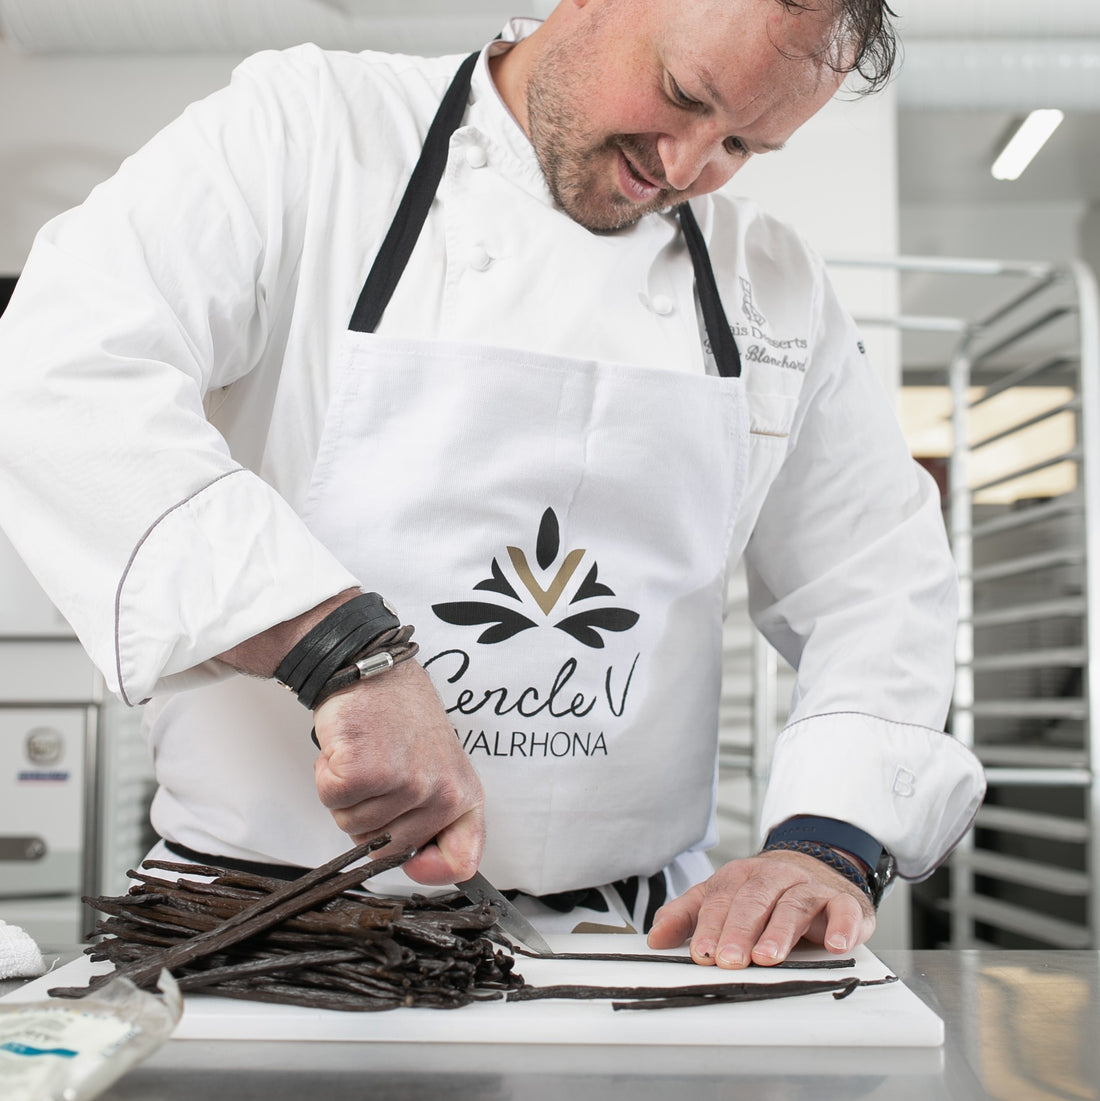 Chef Yann Blanchard using Norohy vanilla and Valrhona chocolate. Yann Haute Patisserie, French desserts and bakery shop in Calgary. Best pastries like macarons, cakes, birthday cakes, bread, ice cream and almond croissants!